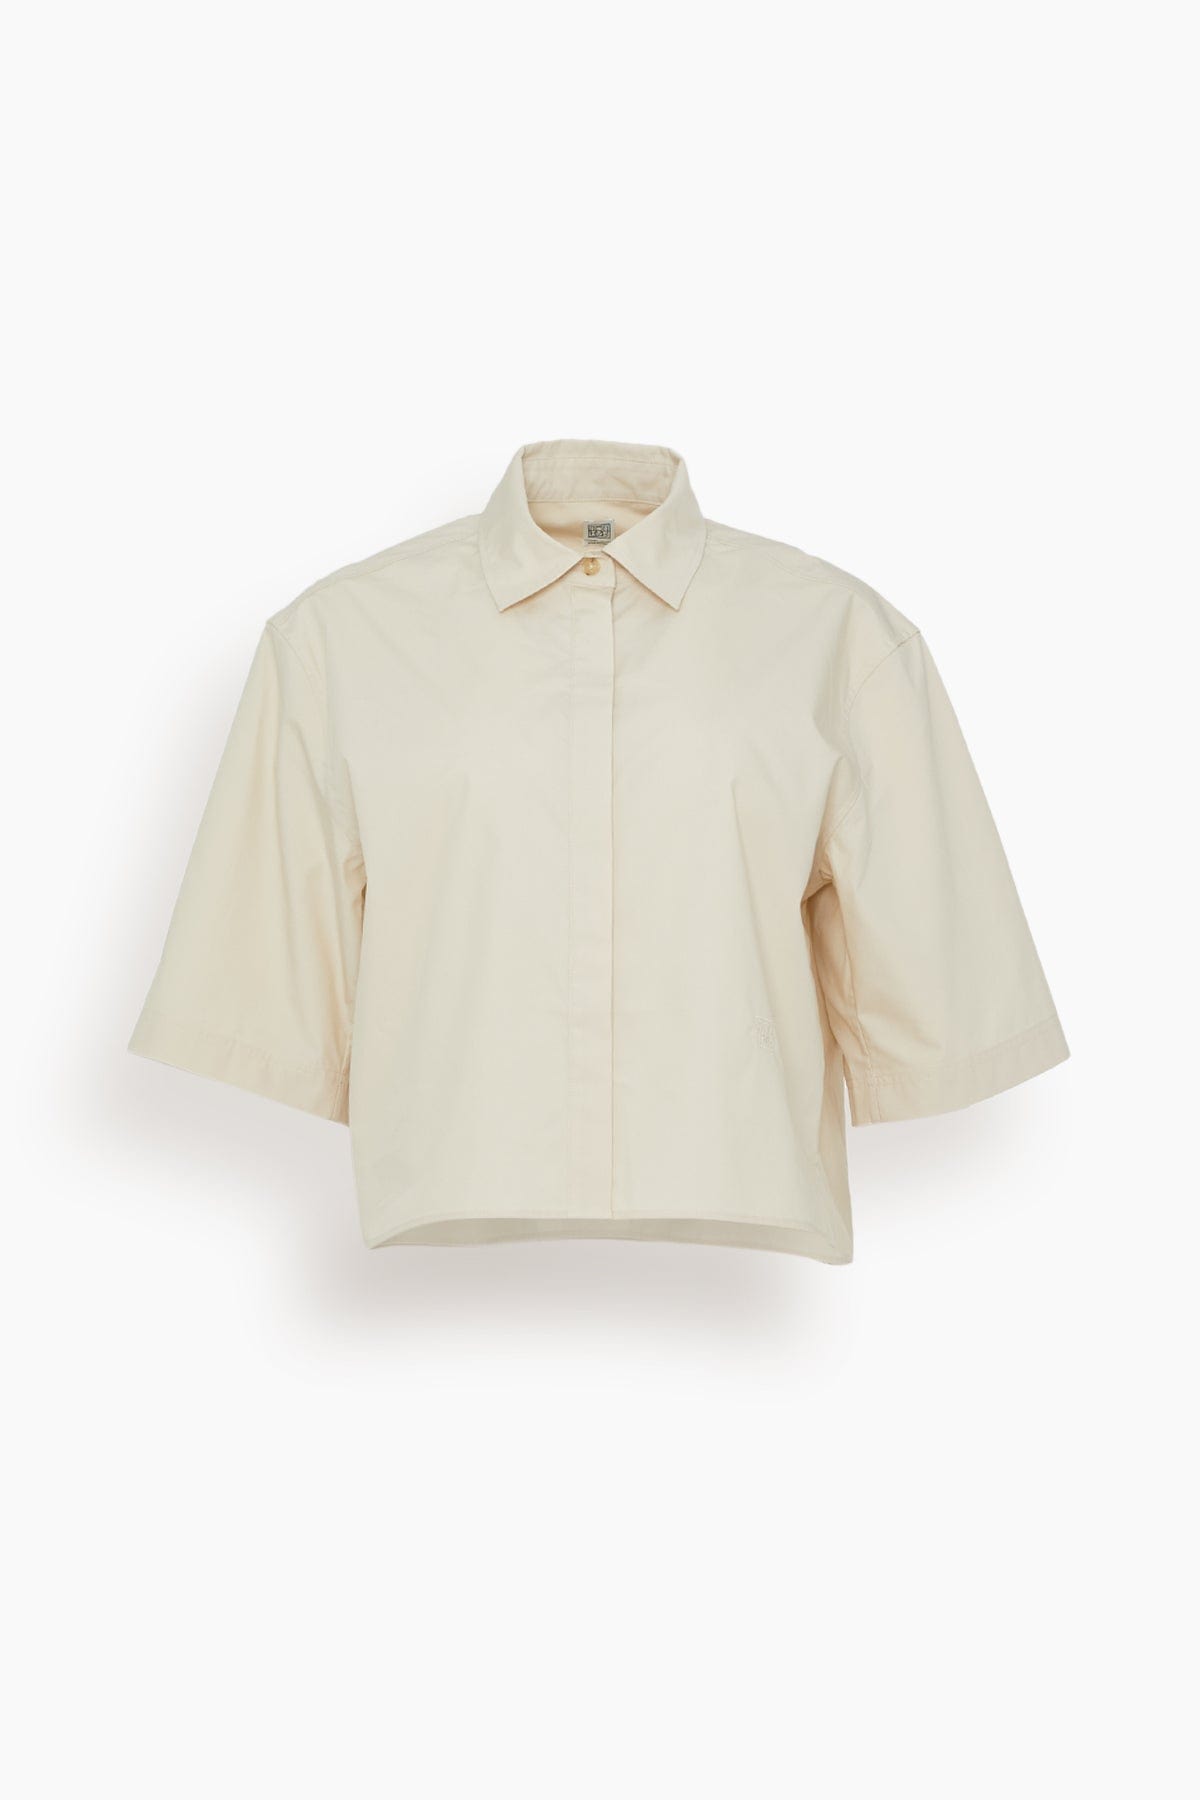 Toteme Tops Cropped Cotton-Poplin Shirt in Stone